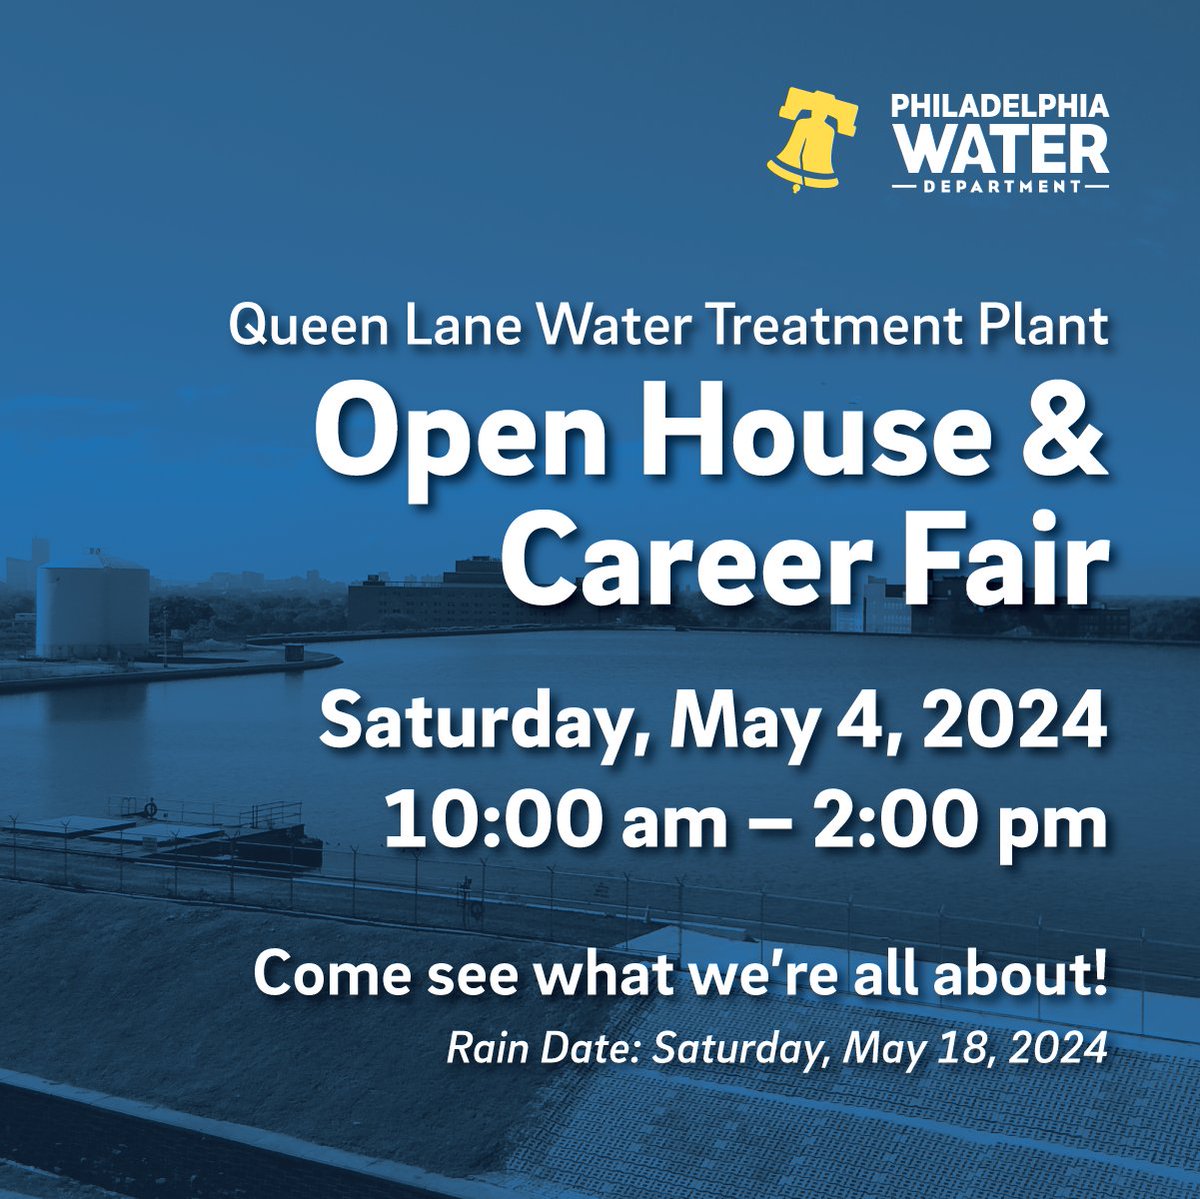 Open House Feature: Water Careers Wondering what it’s like to work at PWD? Speak to the individuals that work hard every day to keep our department going! Meet employees from our Meter Unit, Inlet Cleaning Unit, Distribution Unit, Bureau of Laboratory Services, and more.